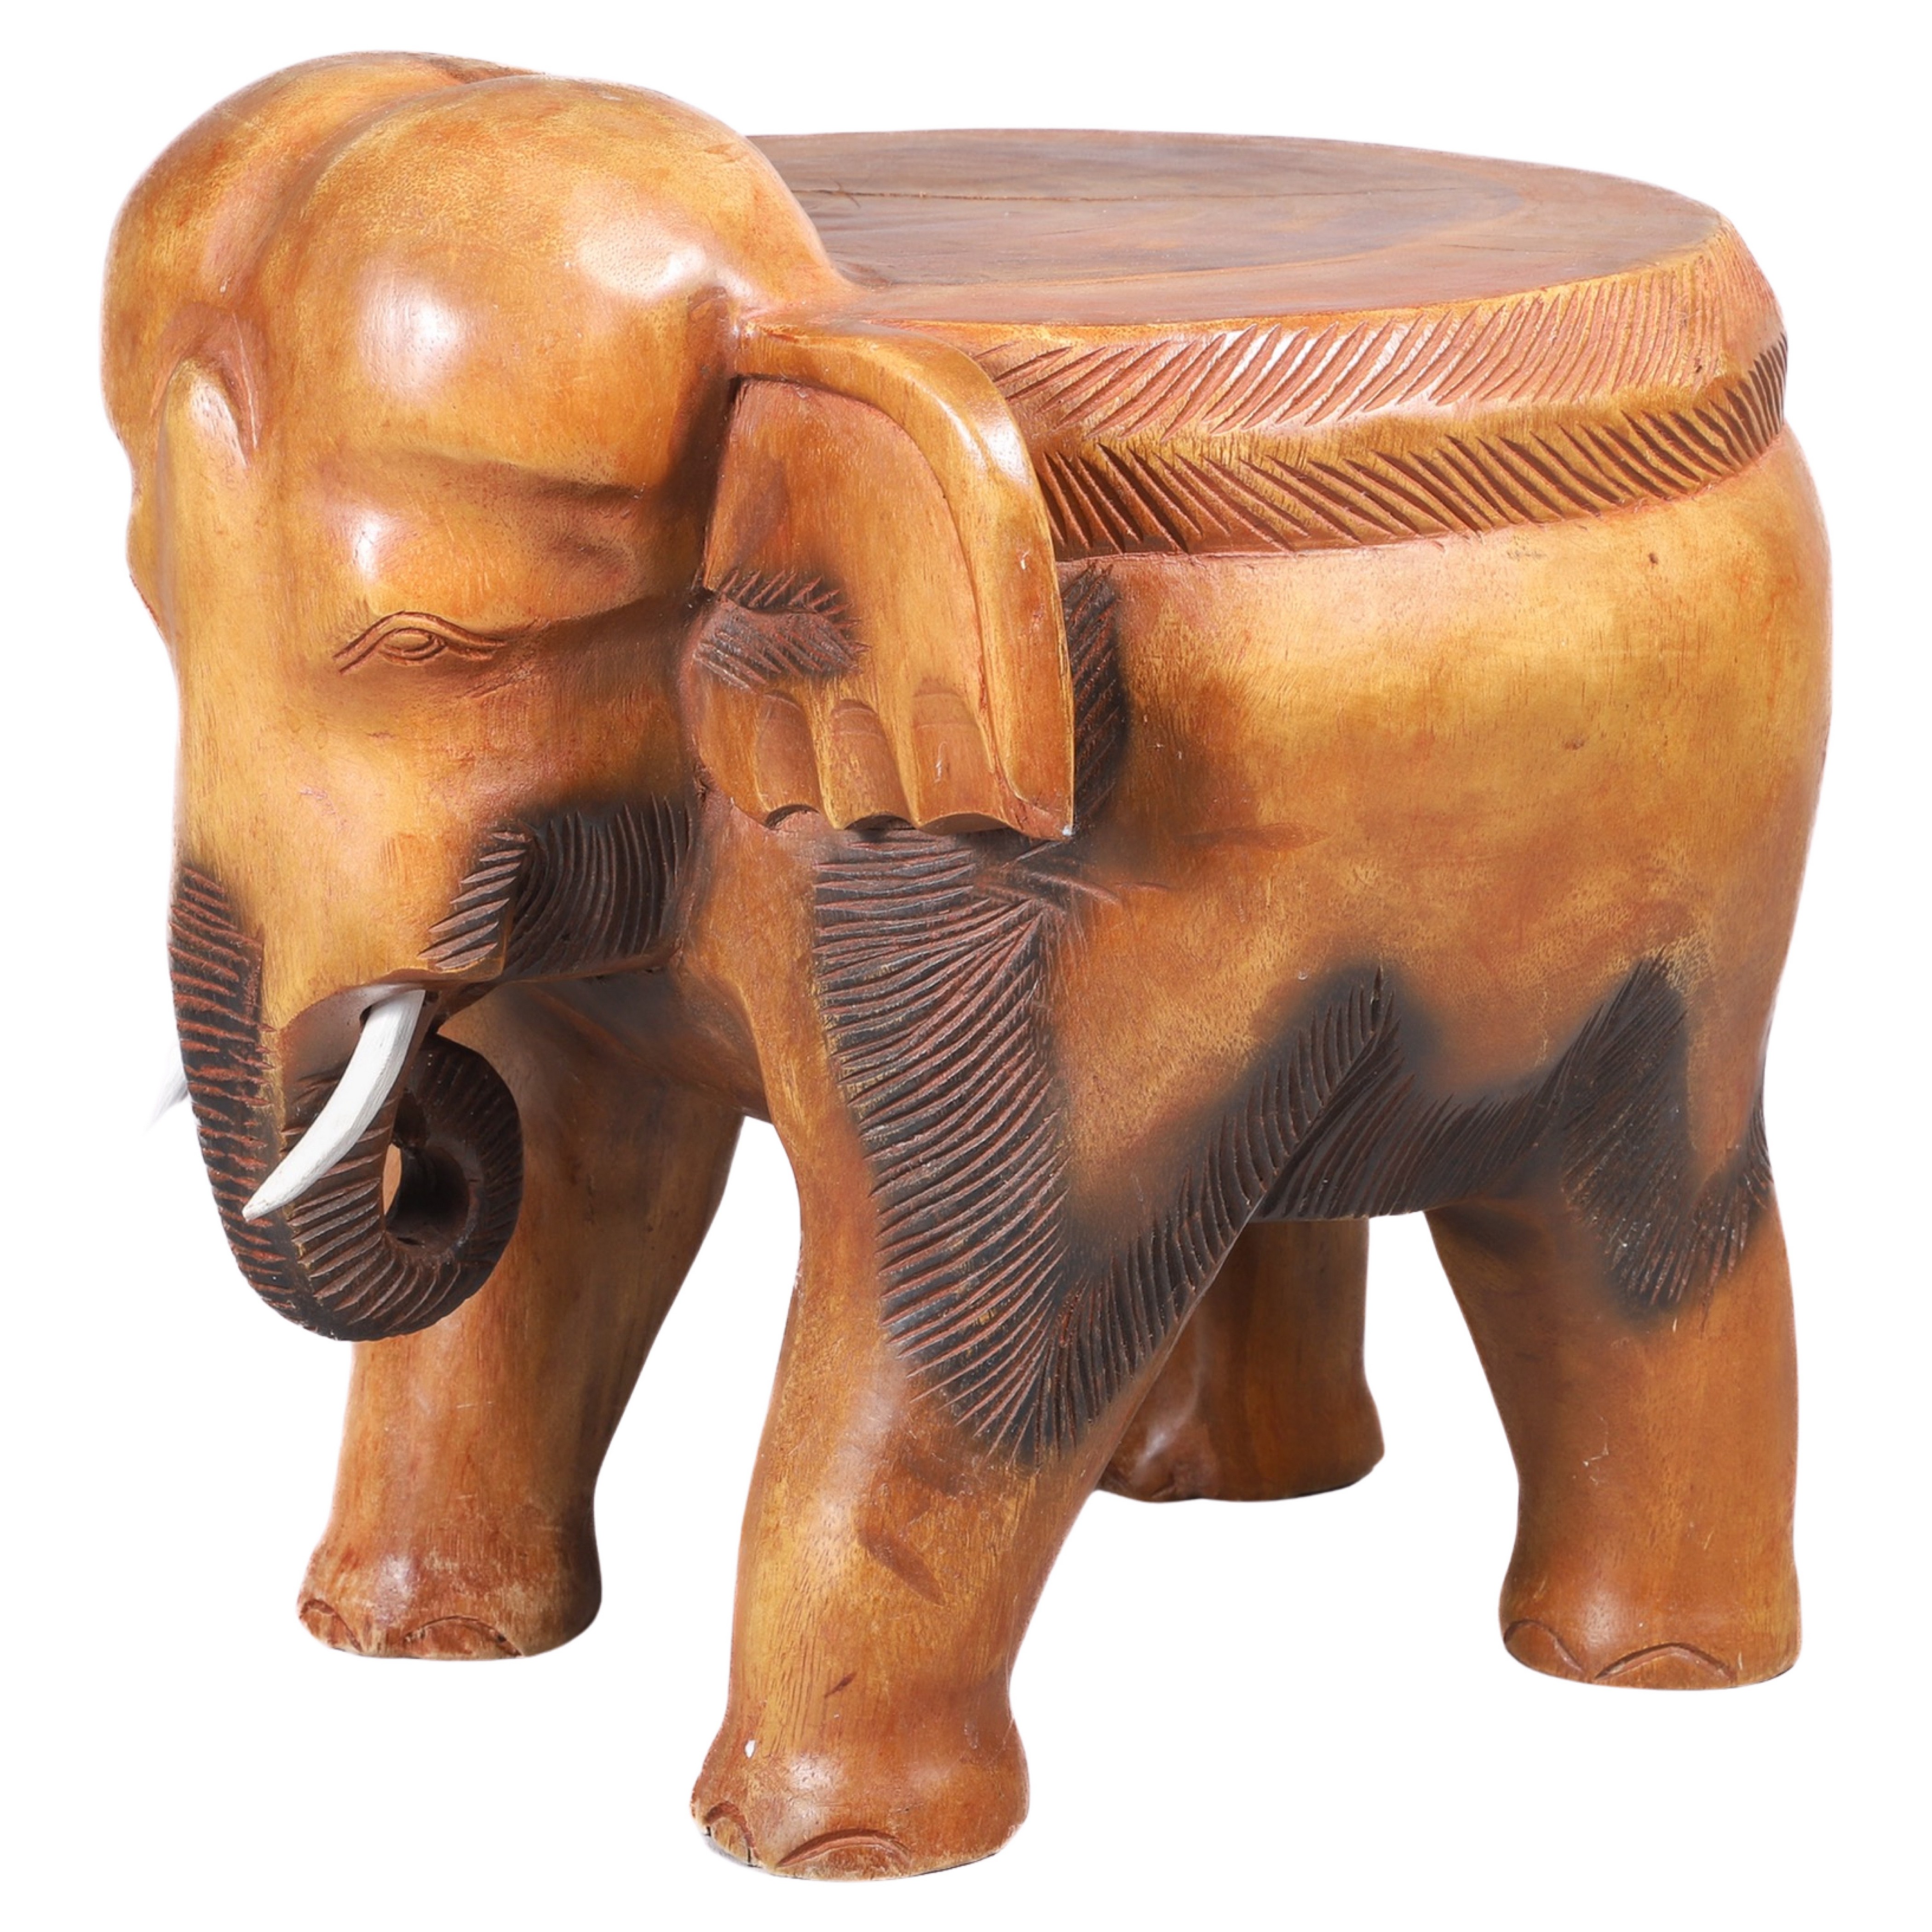 Carved wood elephant stool with